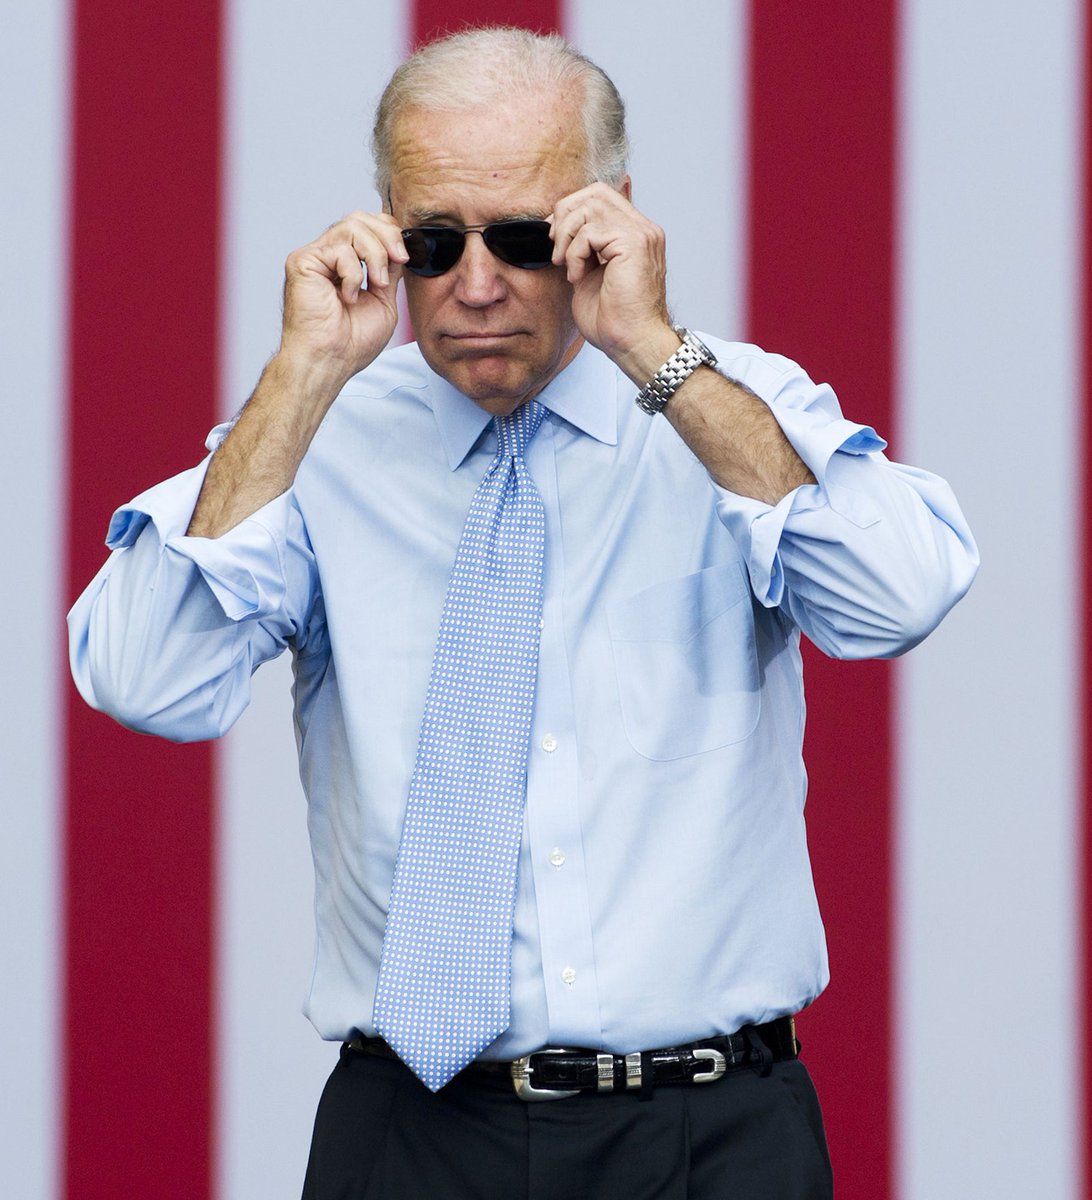 A transparent lie.A simple Google search shows that Biden never wore a wrist rosary until after that interview.